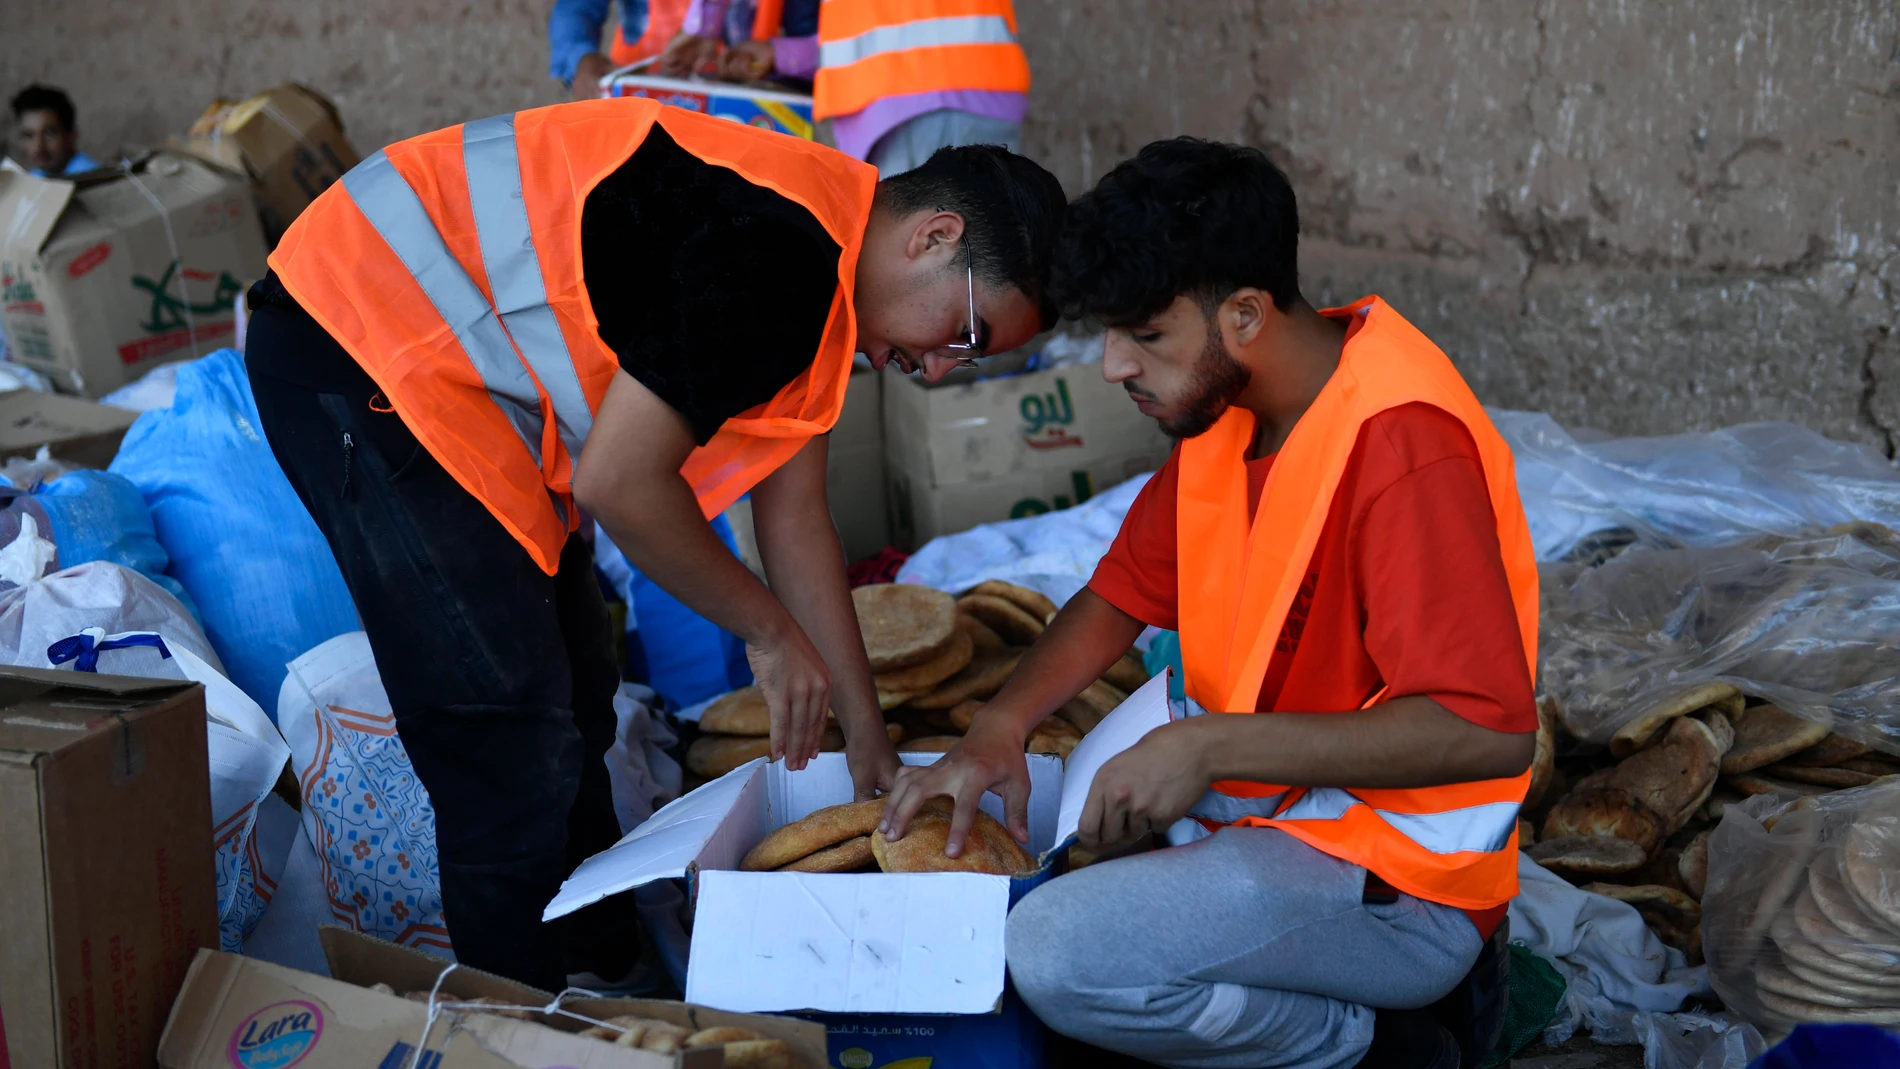 Marrakech (Morocco), 11/09/2023.- Moroccans gather goods donated for relief effort for earthquake victims in Marrakech, south of Marrakesh, Morocco, 11 September 2023. The magnitude 6.8 earthquake that struck central Morocco late 08 September has killed more than 2,450 people and injured around 2,500 others, damaging buildings from villages and towns in the Atlas Mountains to Marrakesh, according to a report released by the country's Interior Ministry. The earthquake has affected more than 30...